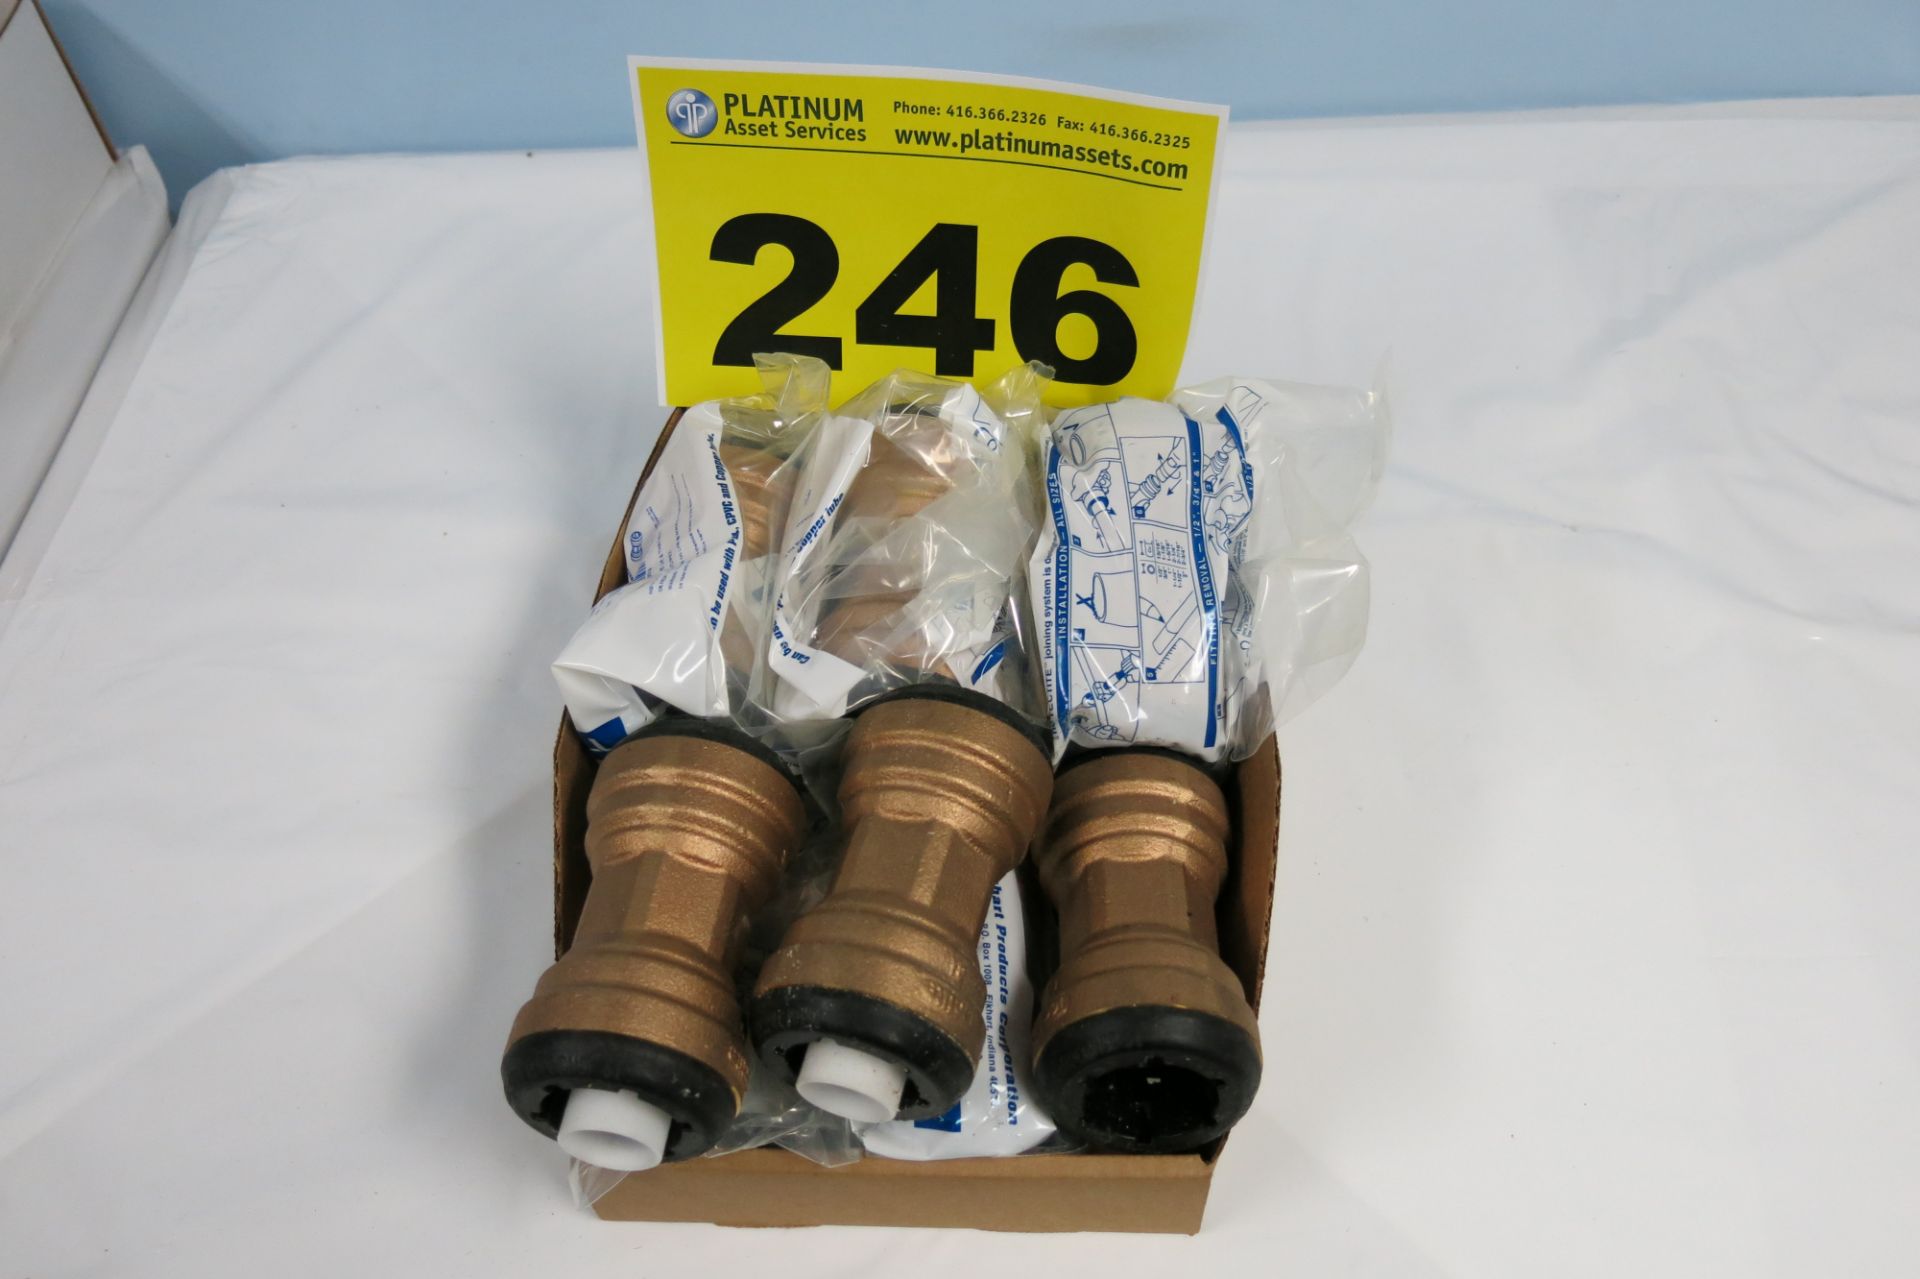 TECTITE, 1 1/2" X 1 1/2" PUSH COUPLINGS - NEW (LOCATED IN MISSISSAUGA)